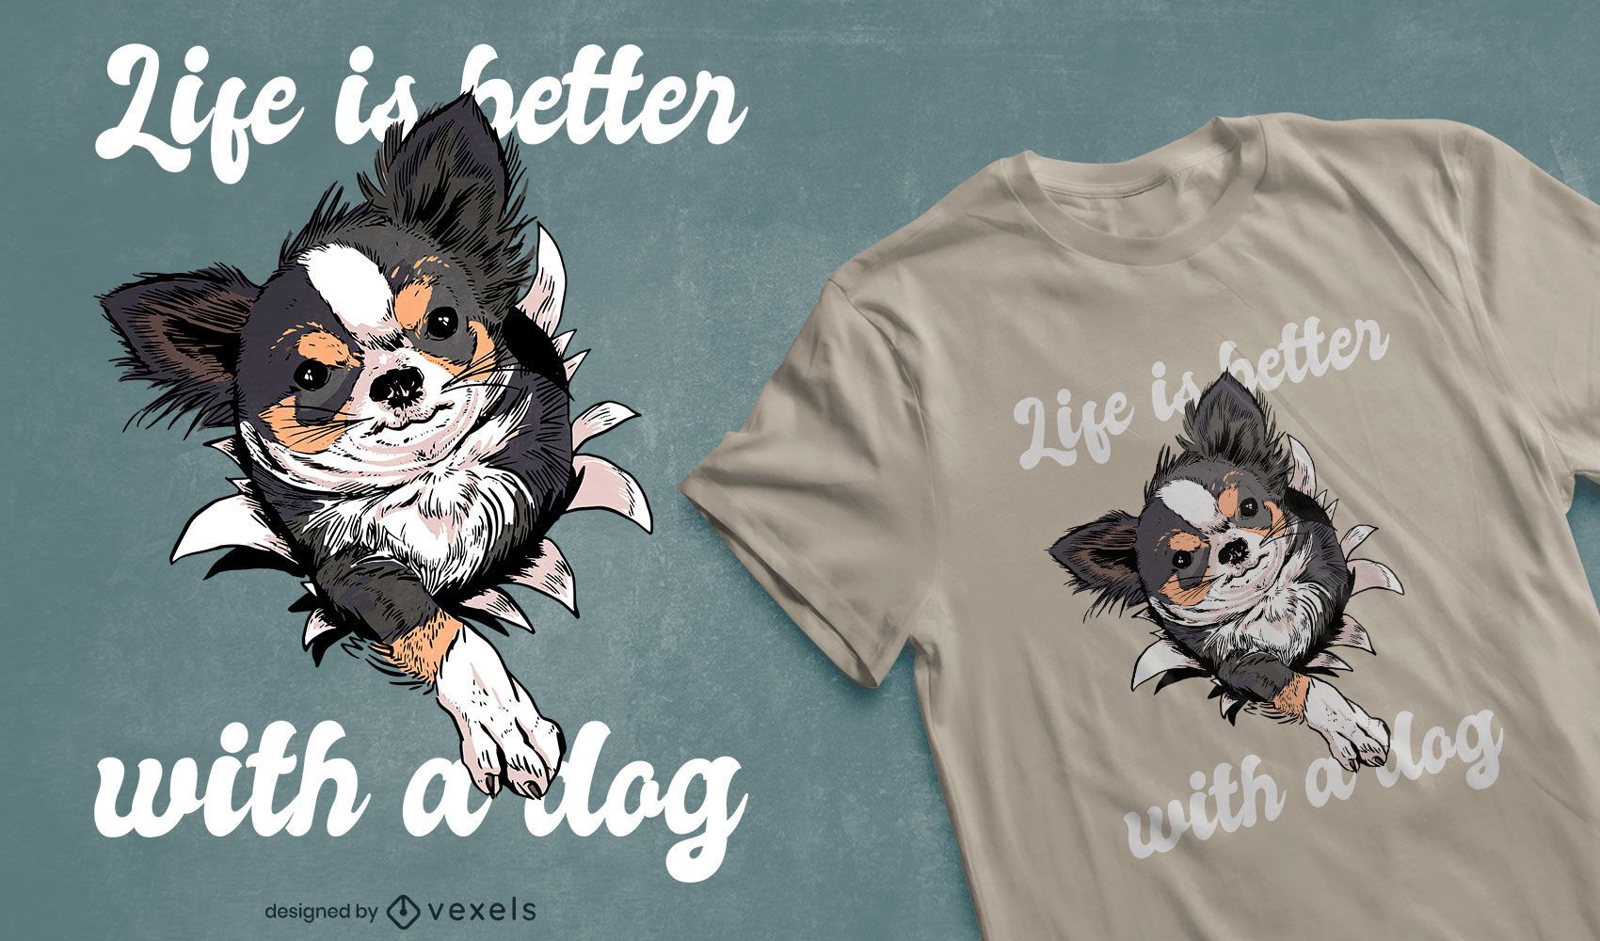 Dog owner quote t-shirt design